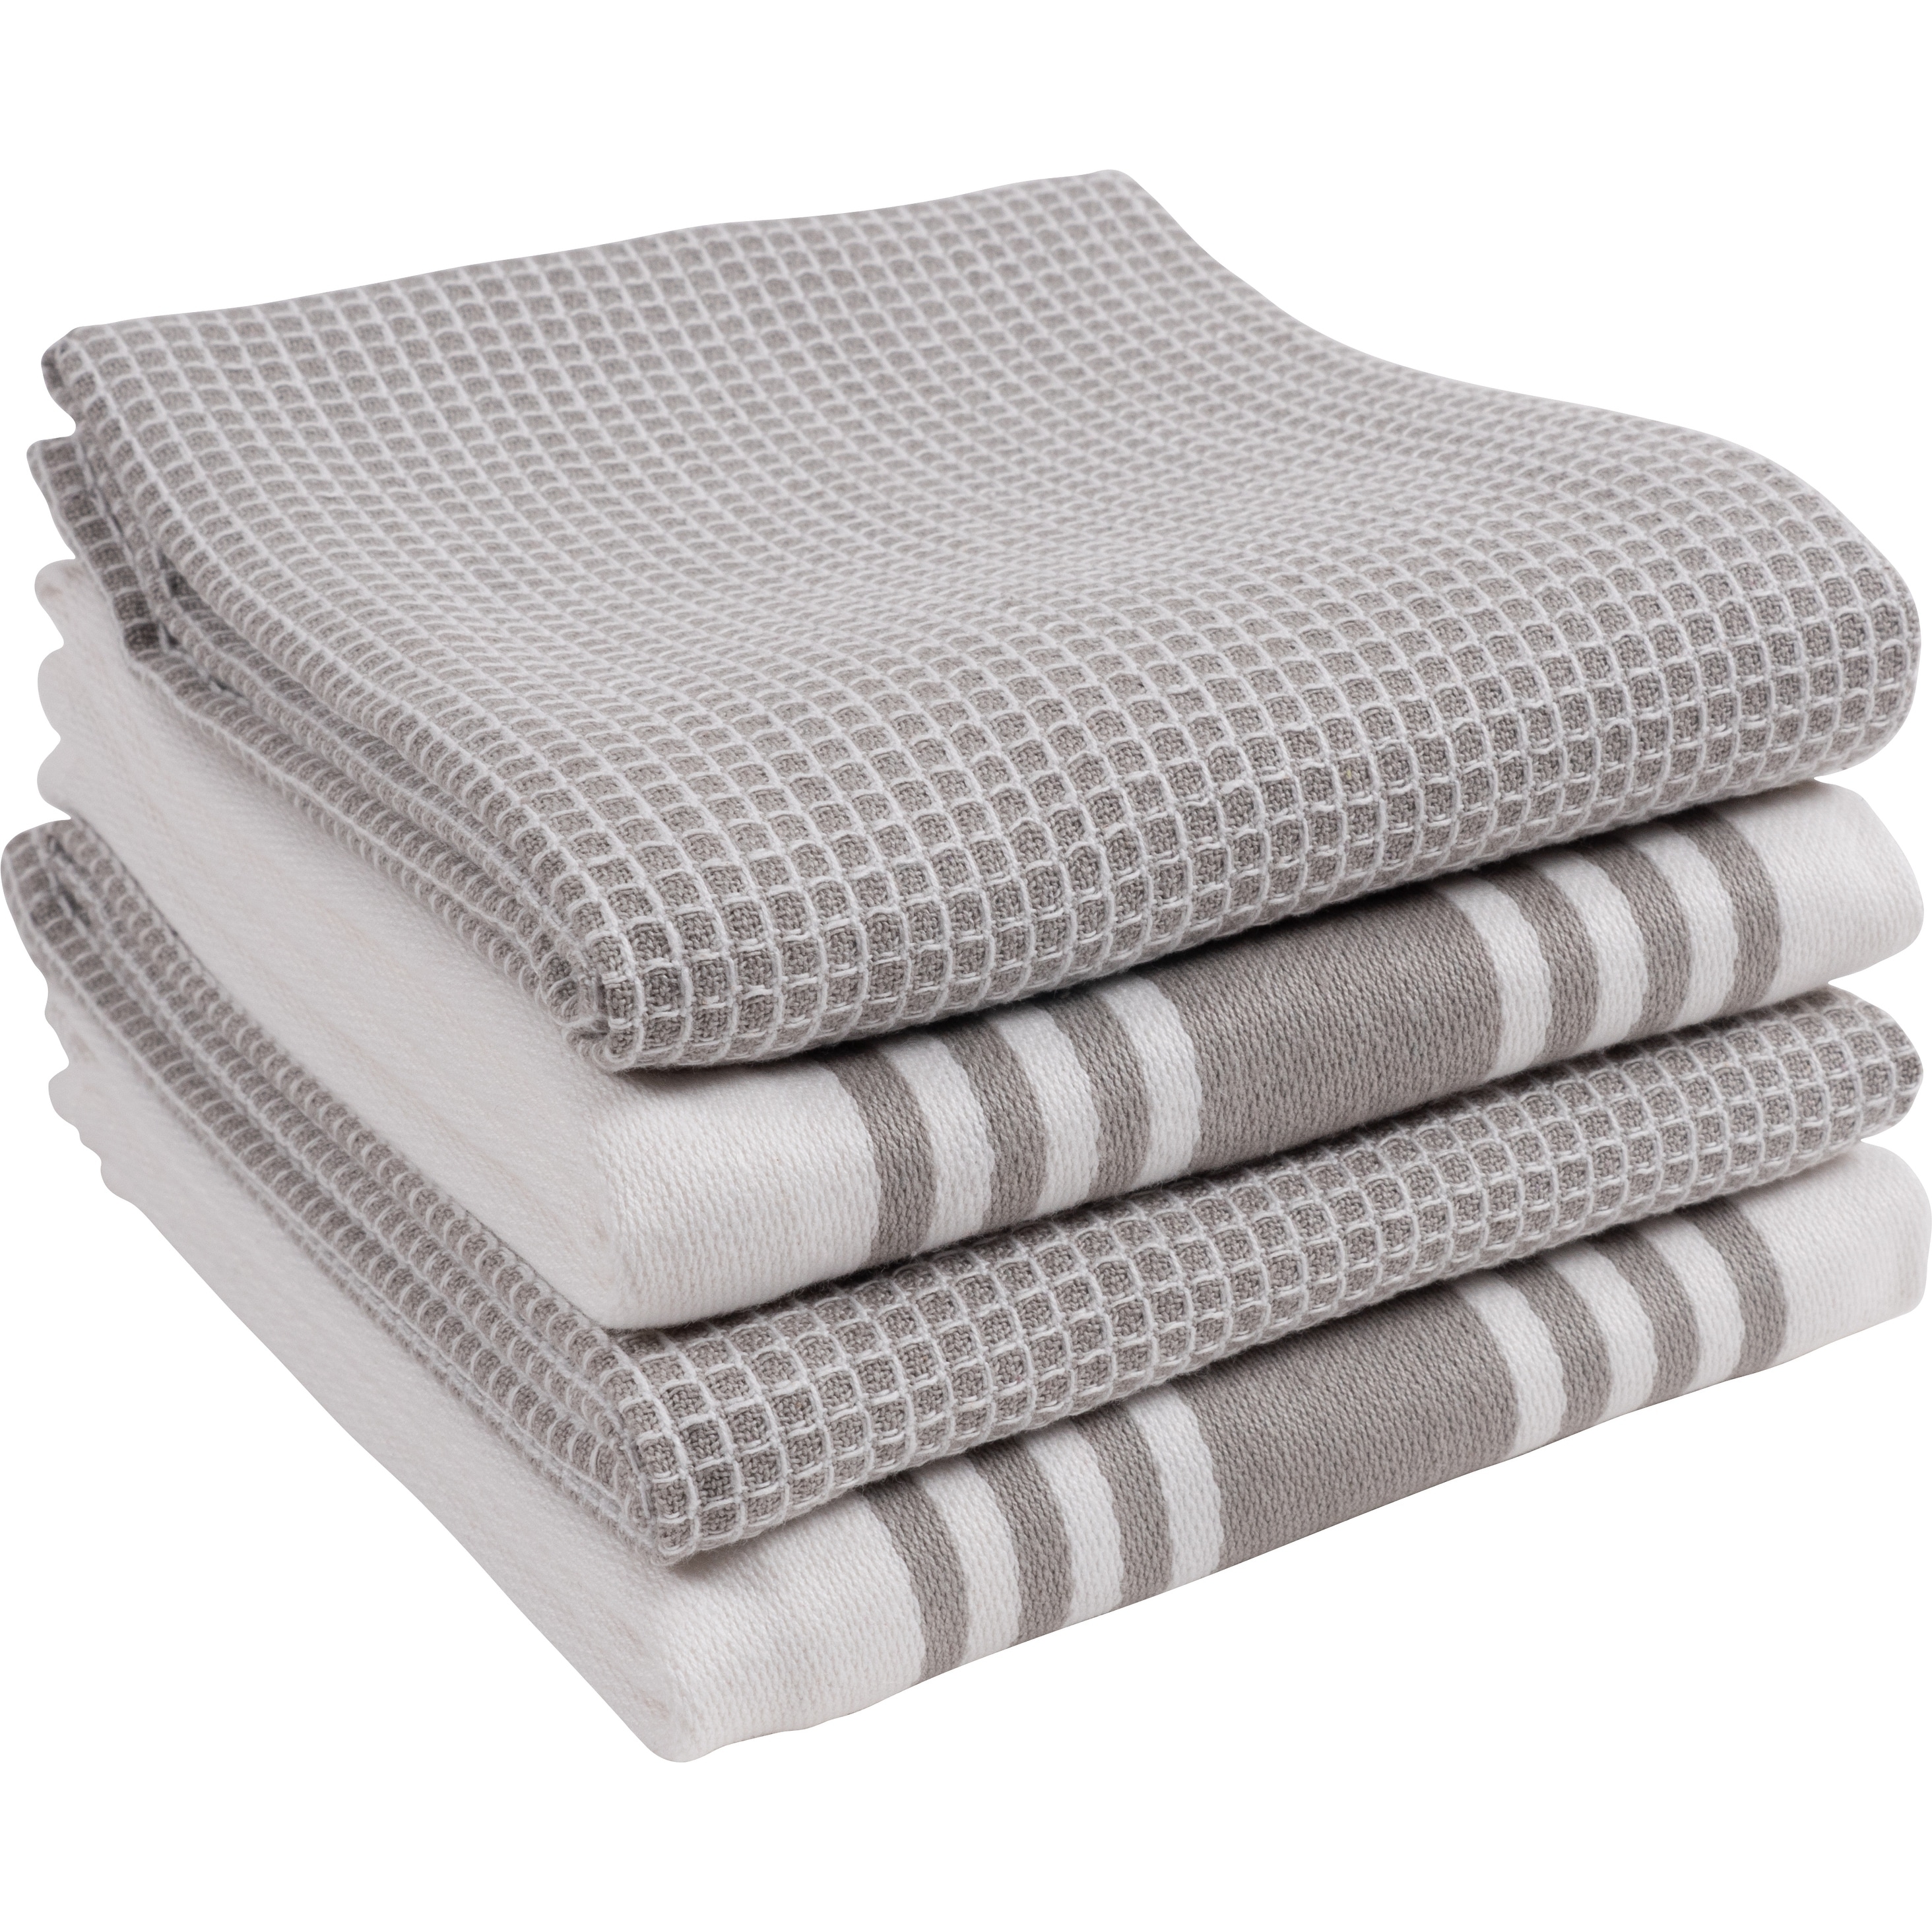 KAF Home Set of 4 Centerband and Waffle Kitchen Towels, 18x28 - On Sale -  Bed Bath & Beyond - 33239709